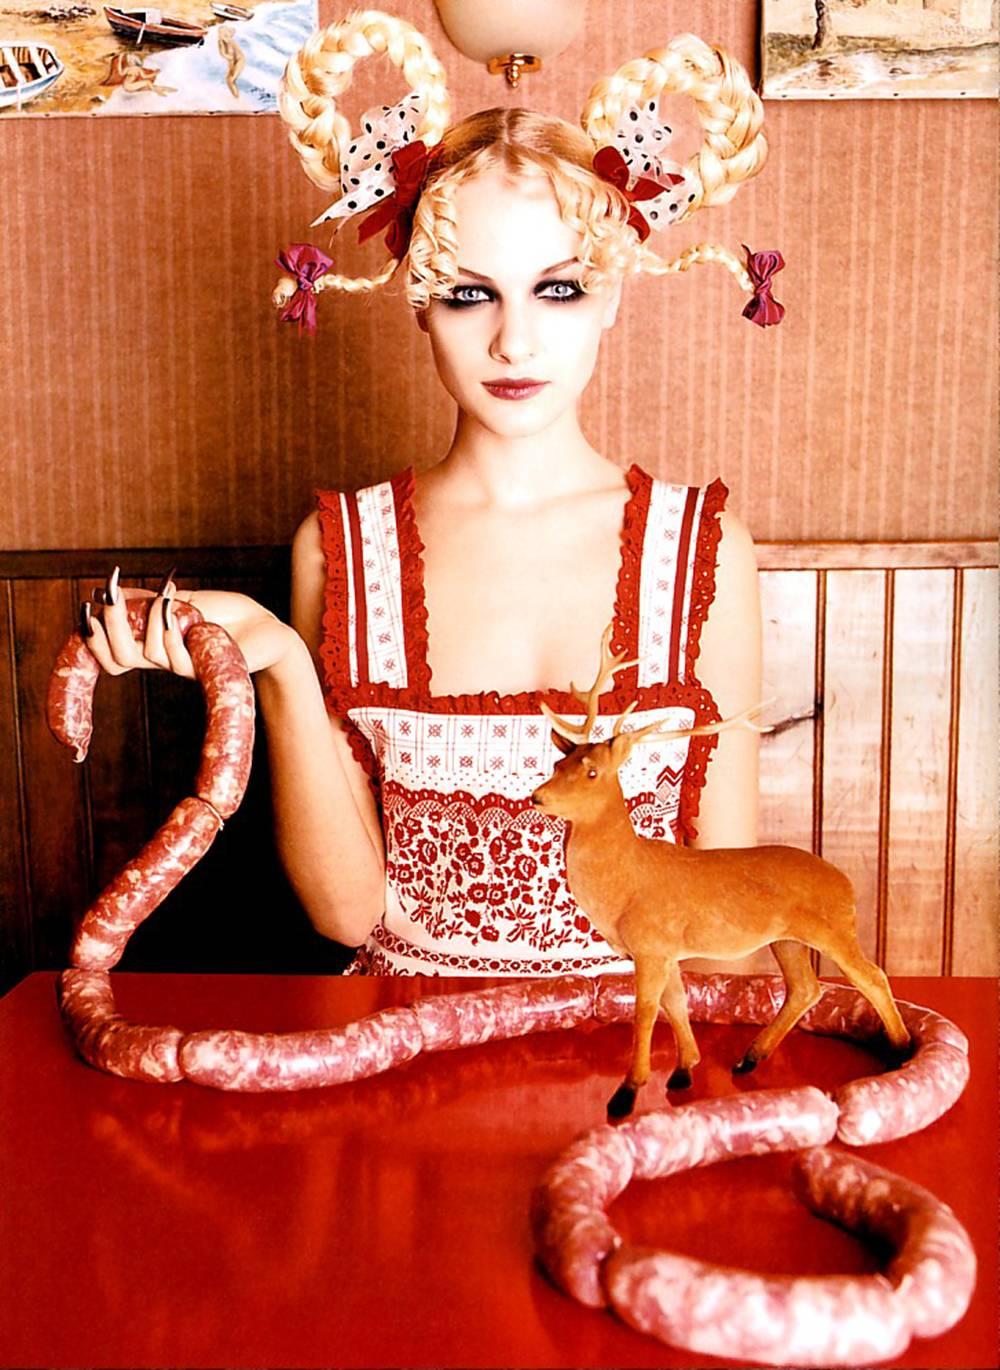 Liebescnitzed, 1996 - Photograph by David LaChapelle